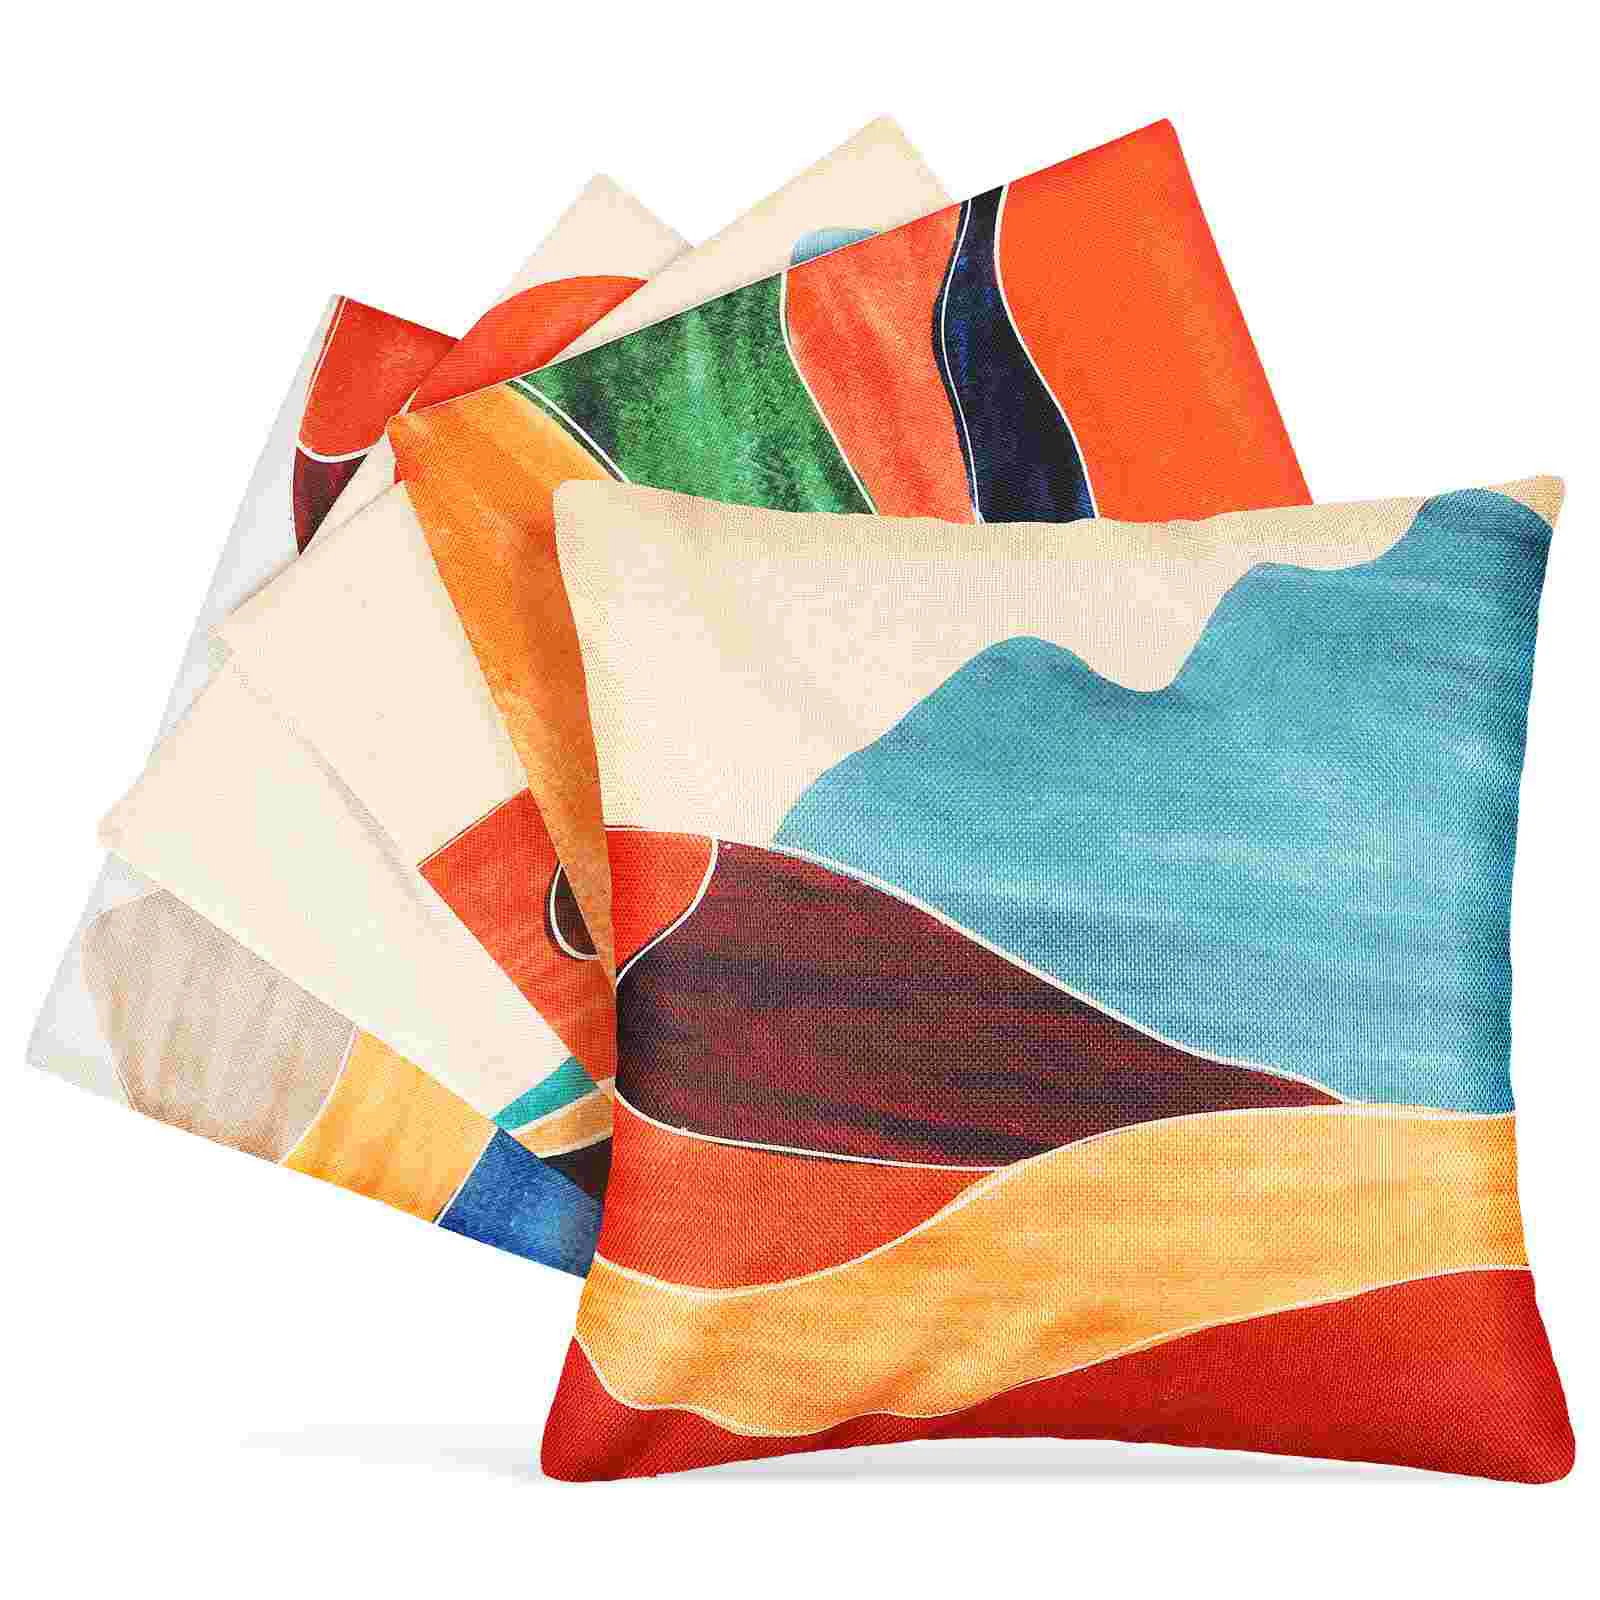 4Pcs Decorative Abstract Painting Linen Throw Pillow Case Pillow Cover for Home for Car Home Living Room Bedroom Sofa